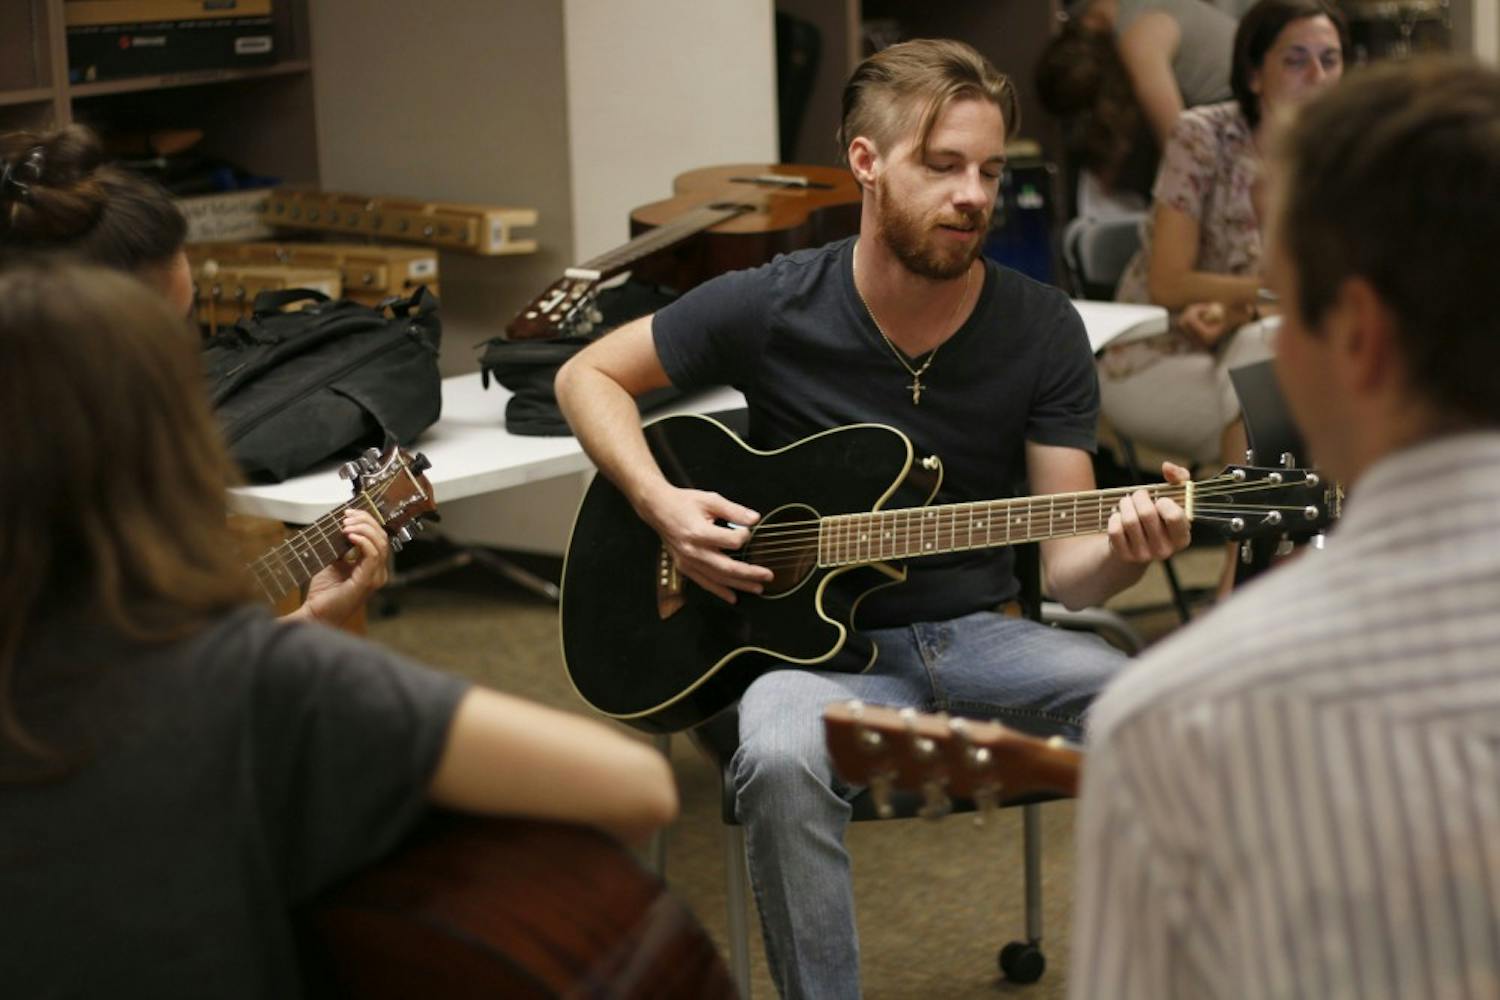 Nick Pompliano, who has been playing guitar for 10 years, teaches leads a group at the Guitar for Vets meeting on Oct. 14, 2016, in Tempe, Arizona. 